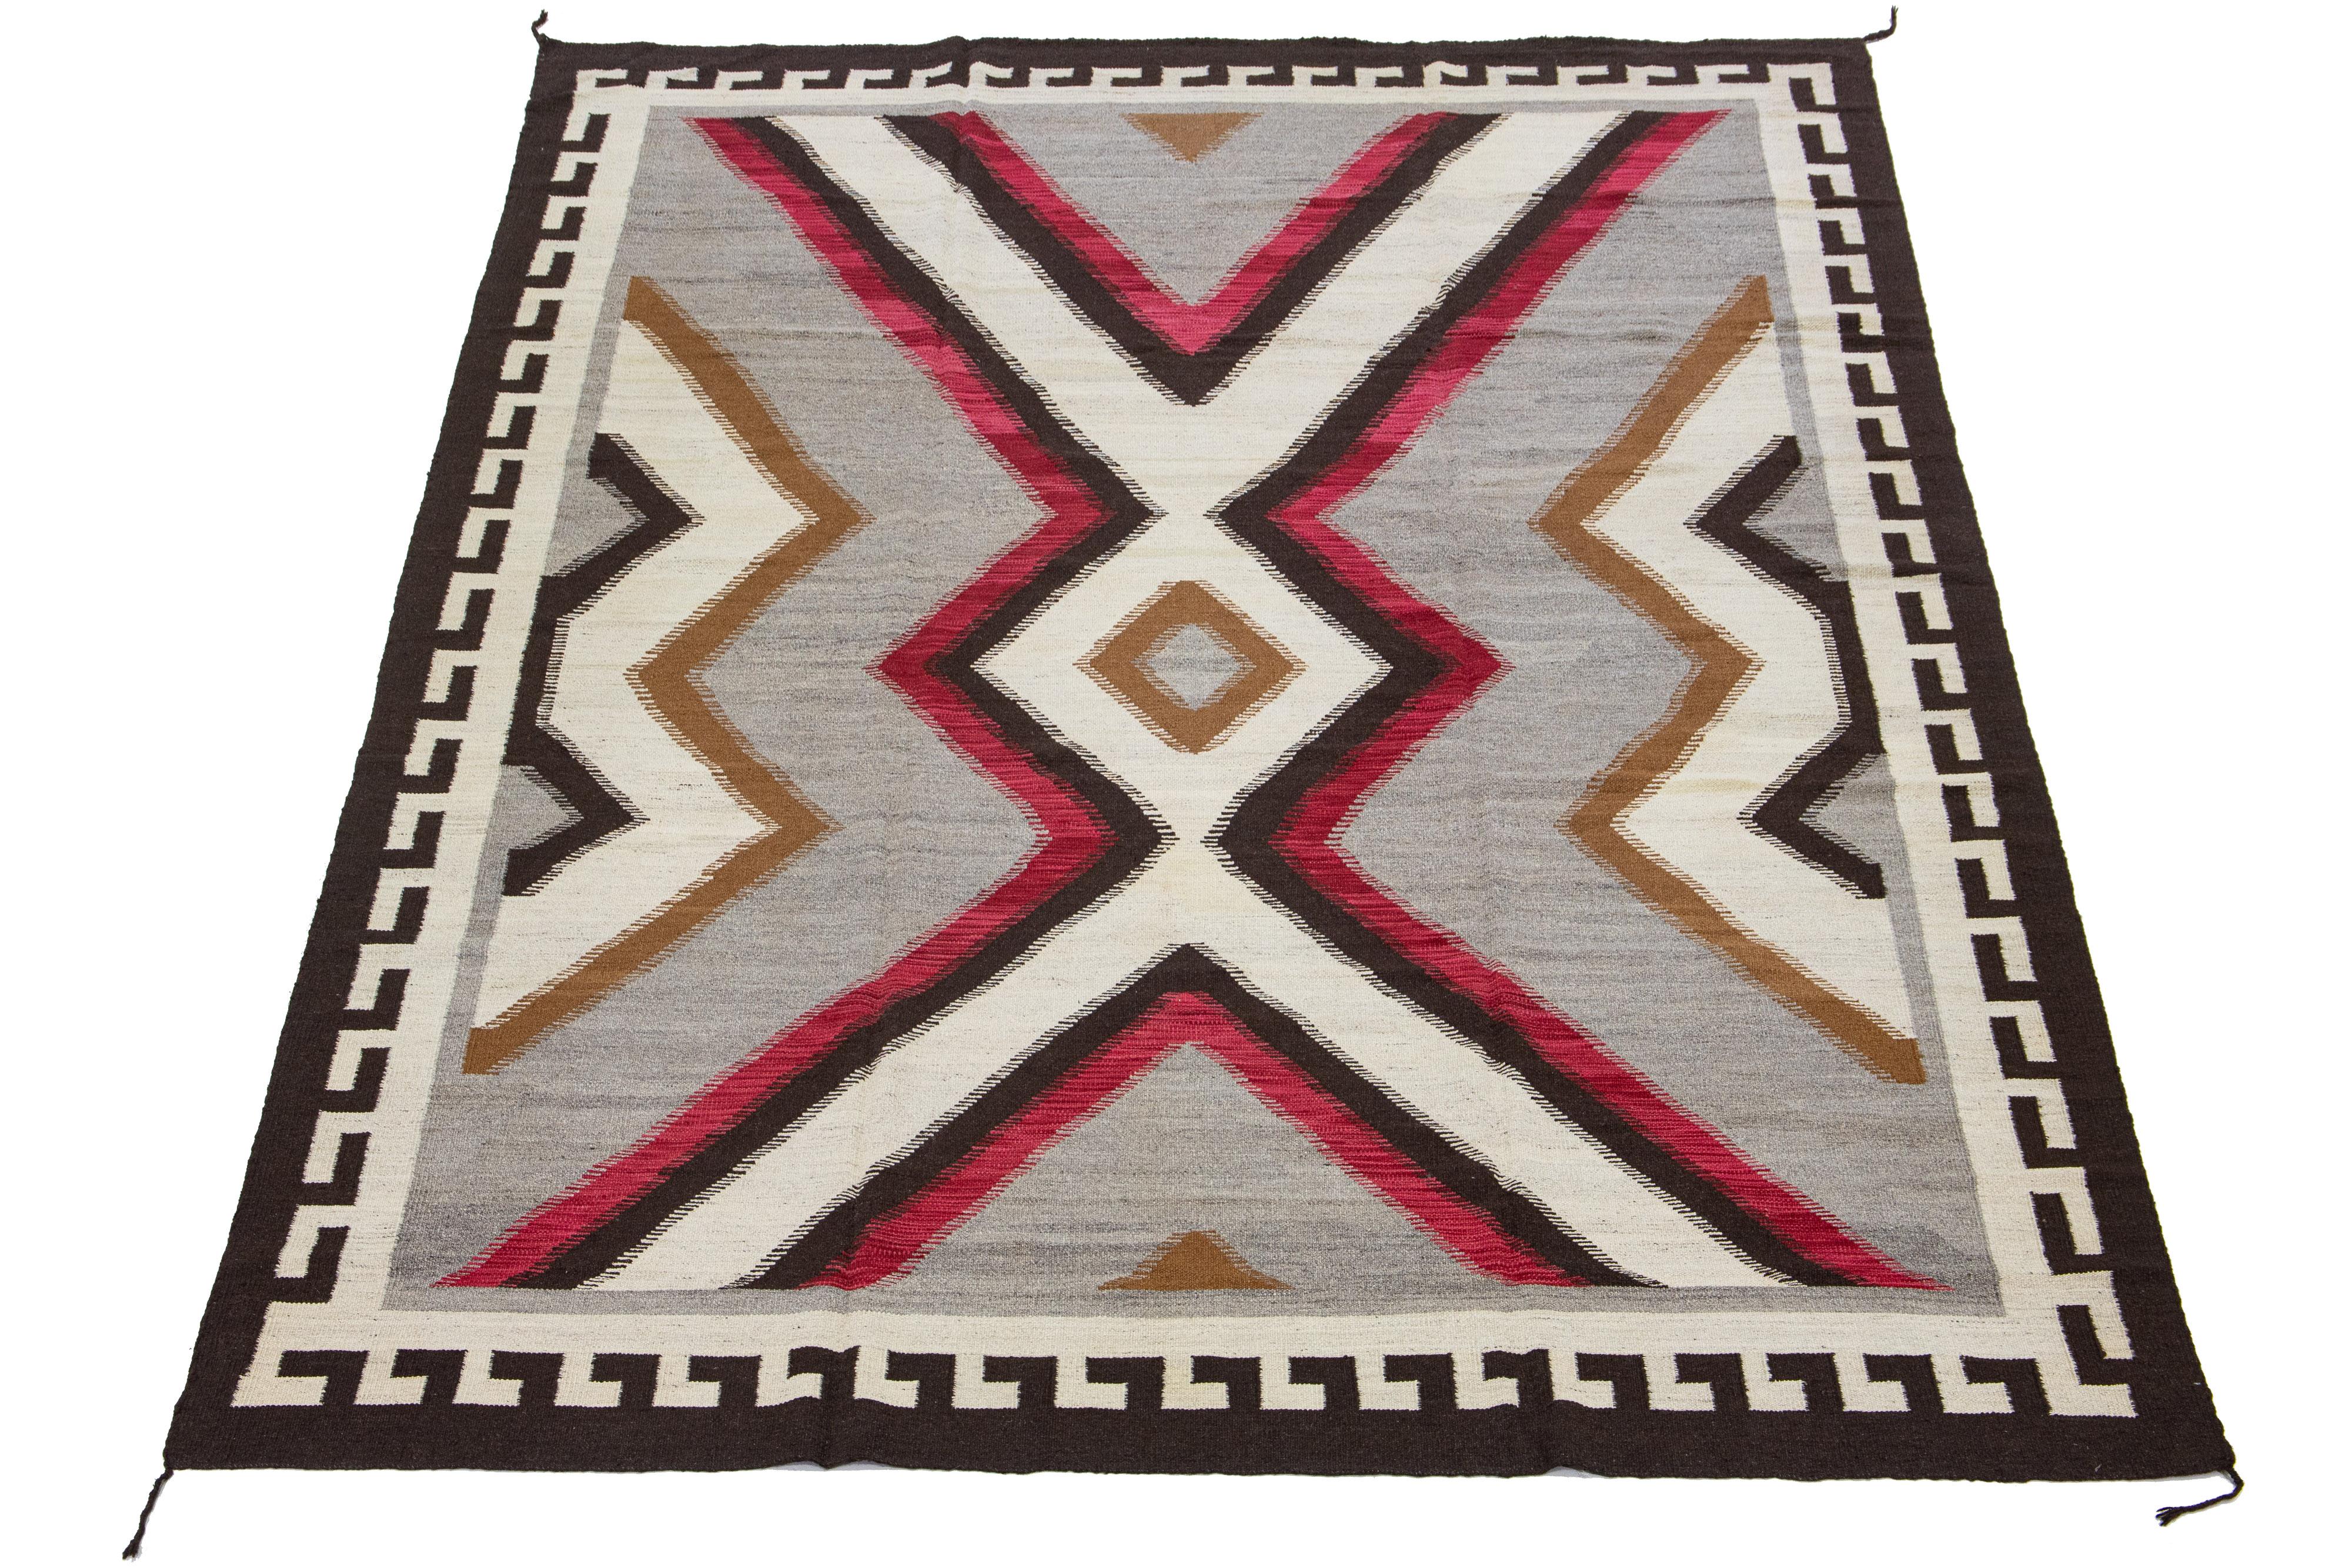 Beautiful contemporary handmade flat-weave Navajo-style wool rug with a gray field. This piece has beige, brown, and red accents in an all-over geometric design.

This rug measures 10'2